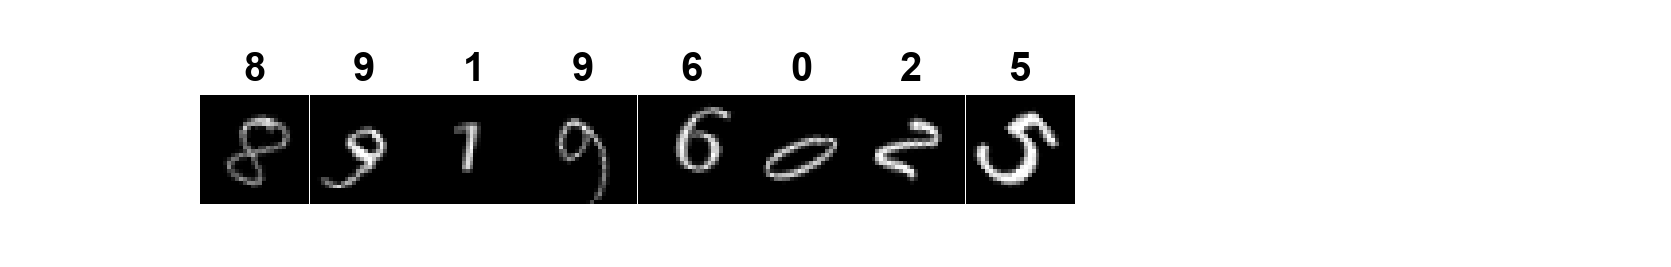 Figure contains 8 axes objects. Axes object 1 with title 8 contains an object of type image. Axes object 2 with title 9 contains an object of type image. Axes object 3 with title 1 contains an object of type image. Axes object 4 with title 9 contains an object of type image. Axes object 5 with title 6 contains an object of type image. Axes object 6 with title 0 contains an object of type image. Axes object 7 with title 2 contains an object of type image. Axes object 8 with title 5 contains an object of type image.